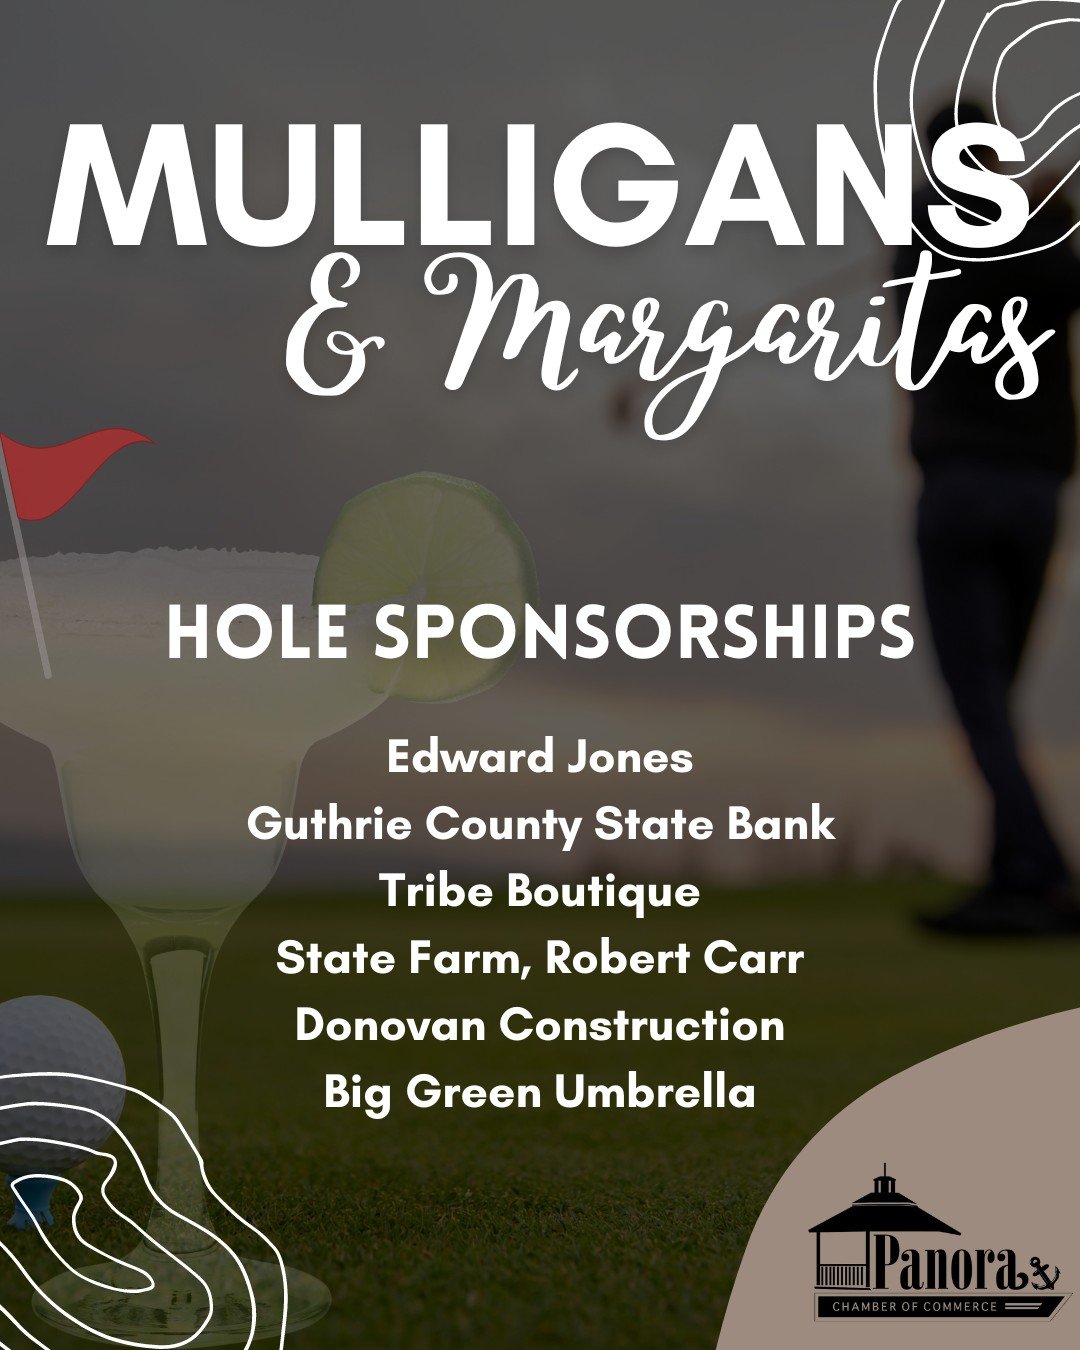 🌟 A Heartfelt Thank You To Our Hole Sponsors! 🌟

As we prepare for another successful golf tournament, we want to take a moment to extend our deepest gratitude to our first group of incredible Mulligan and Margarita Hole Sponsors. 

Thanks to you, 